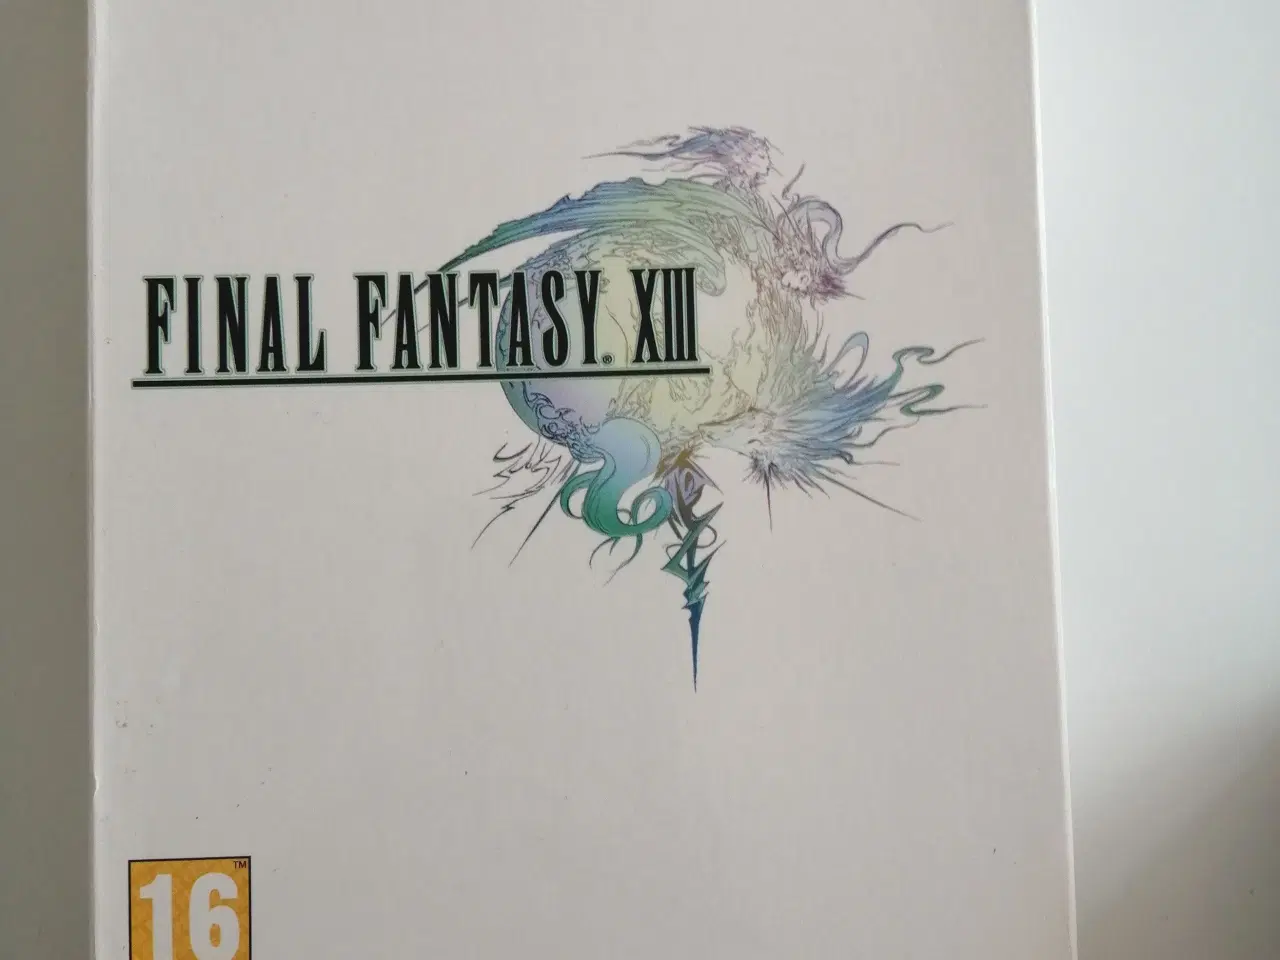 Billede 1 - Final Fantasy XII Limited Collector's Edition